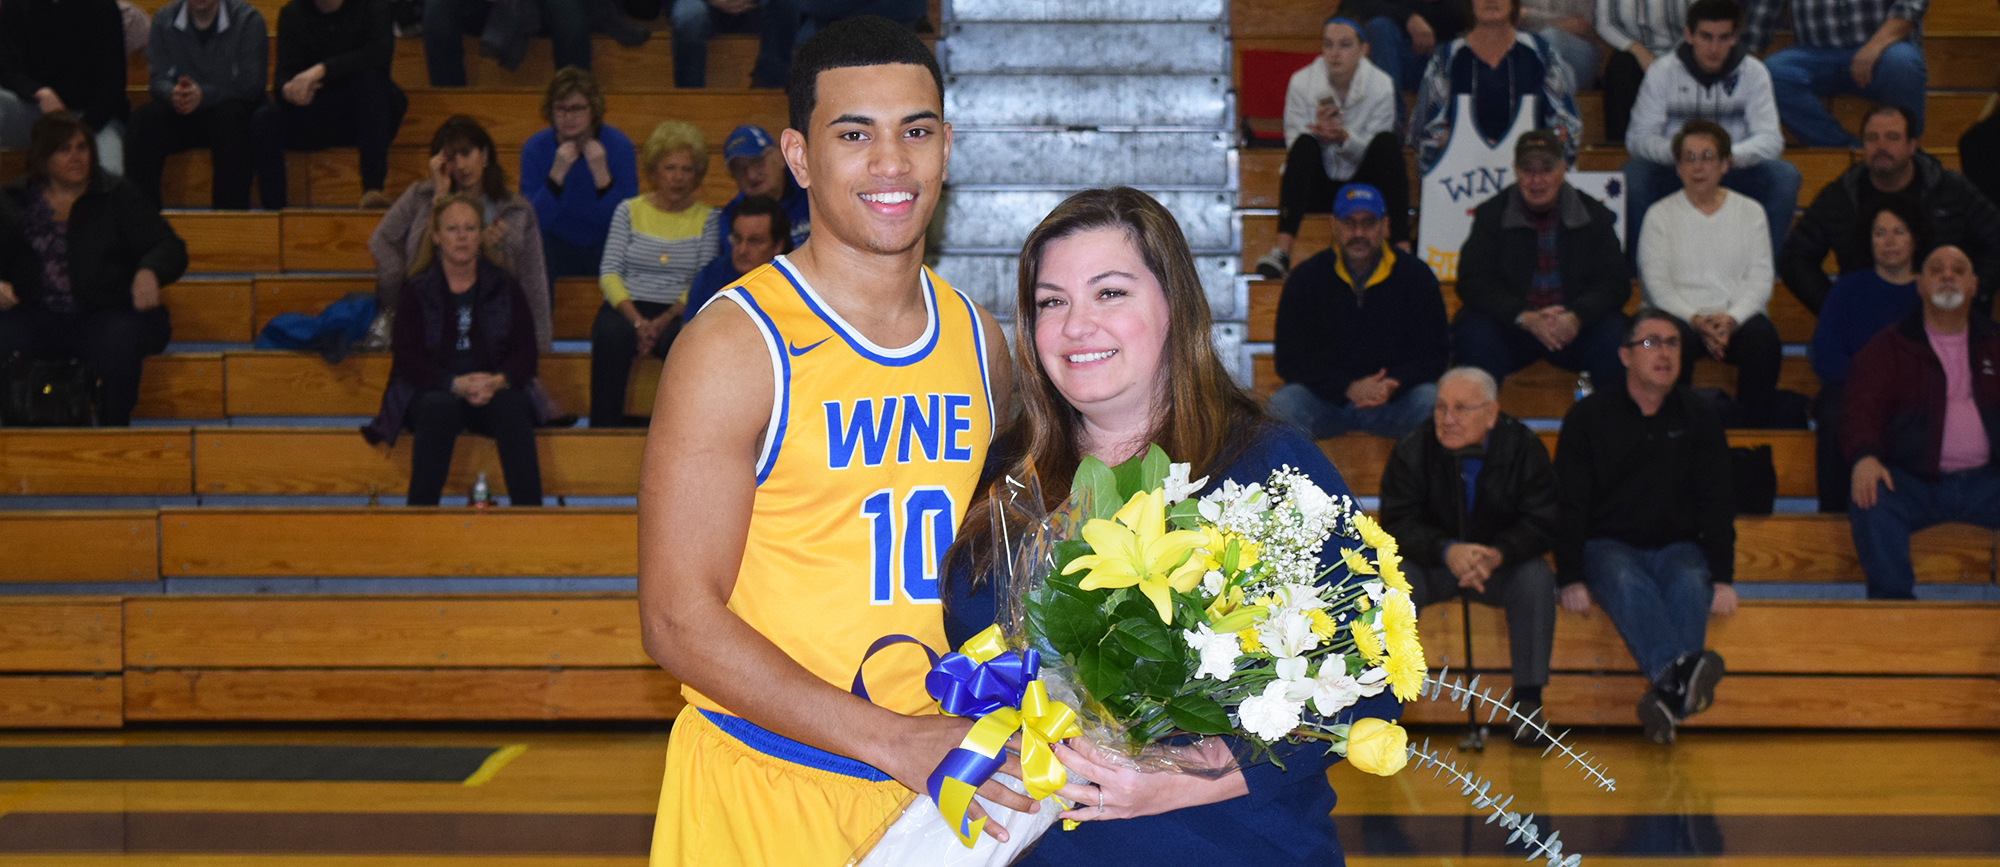 Senior Anthony Service was honored prior to the start of Western New England's 111-89 victory over UNE on Saturday. (Photo by Rachael Margossian)